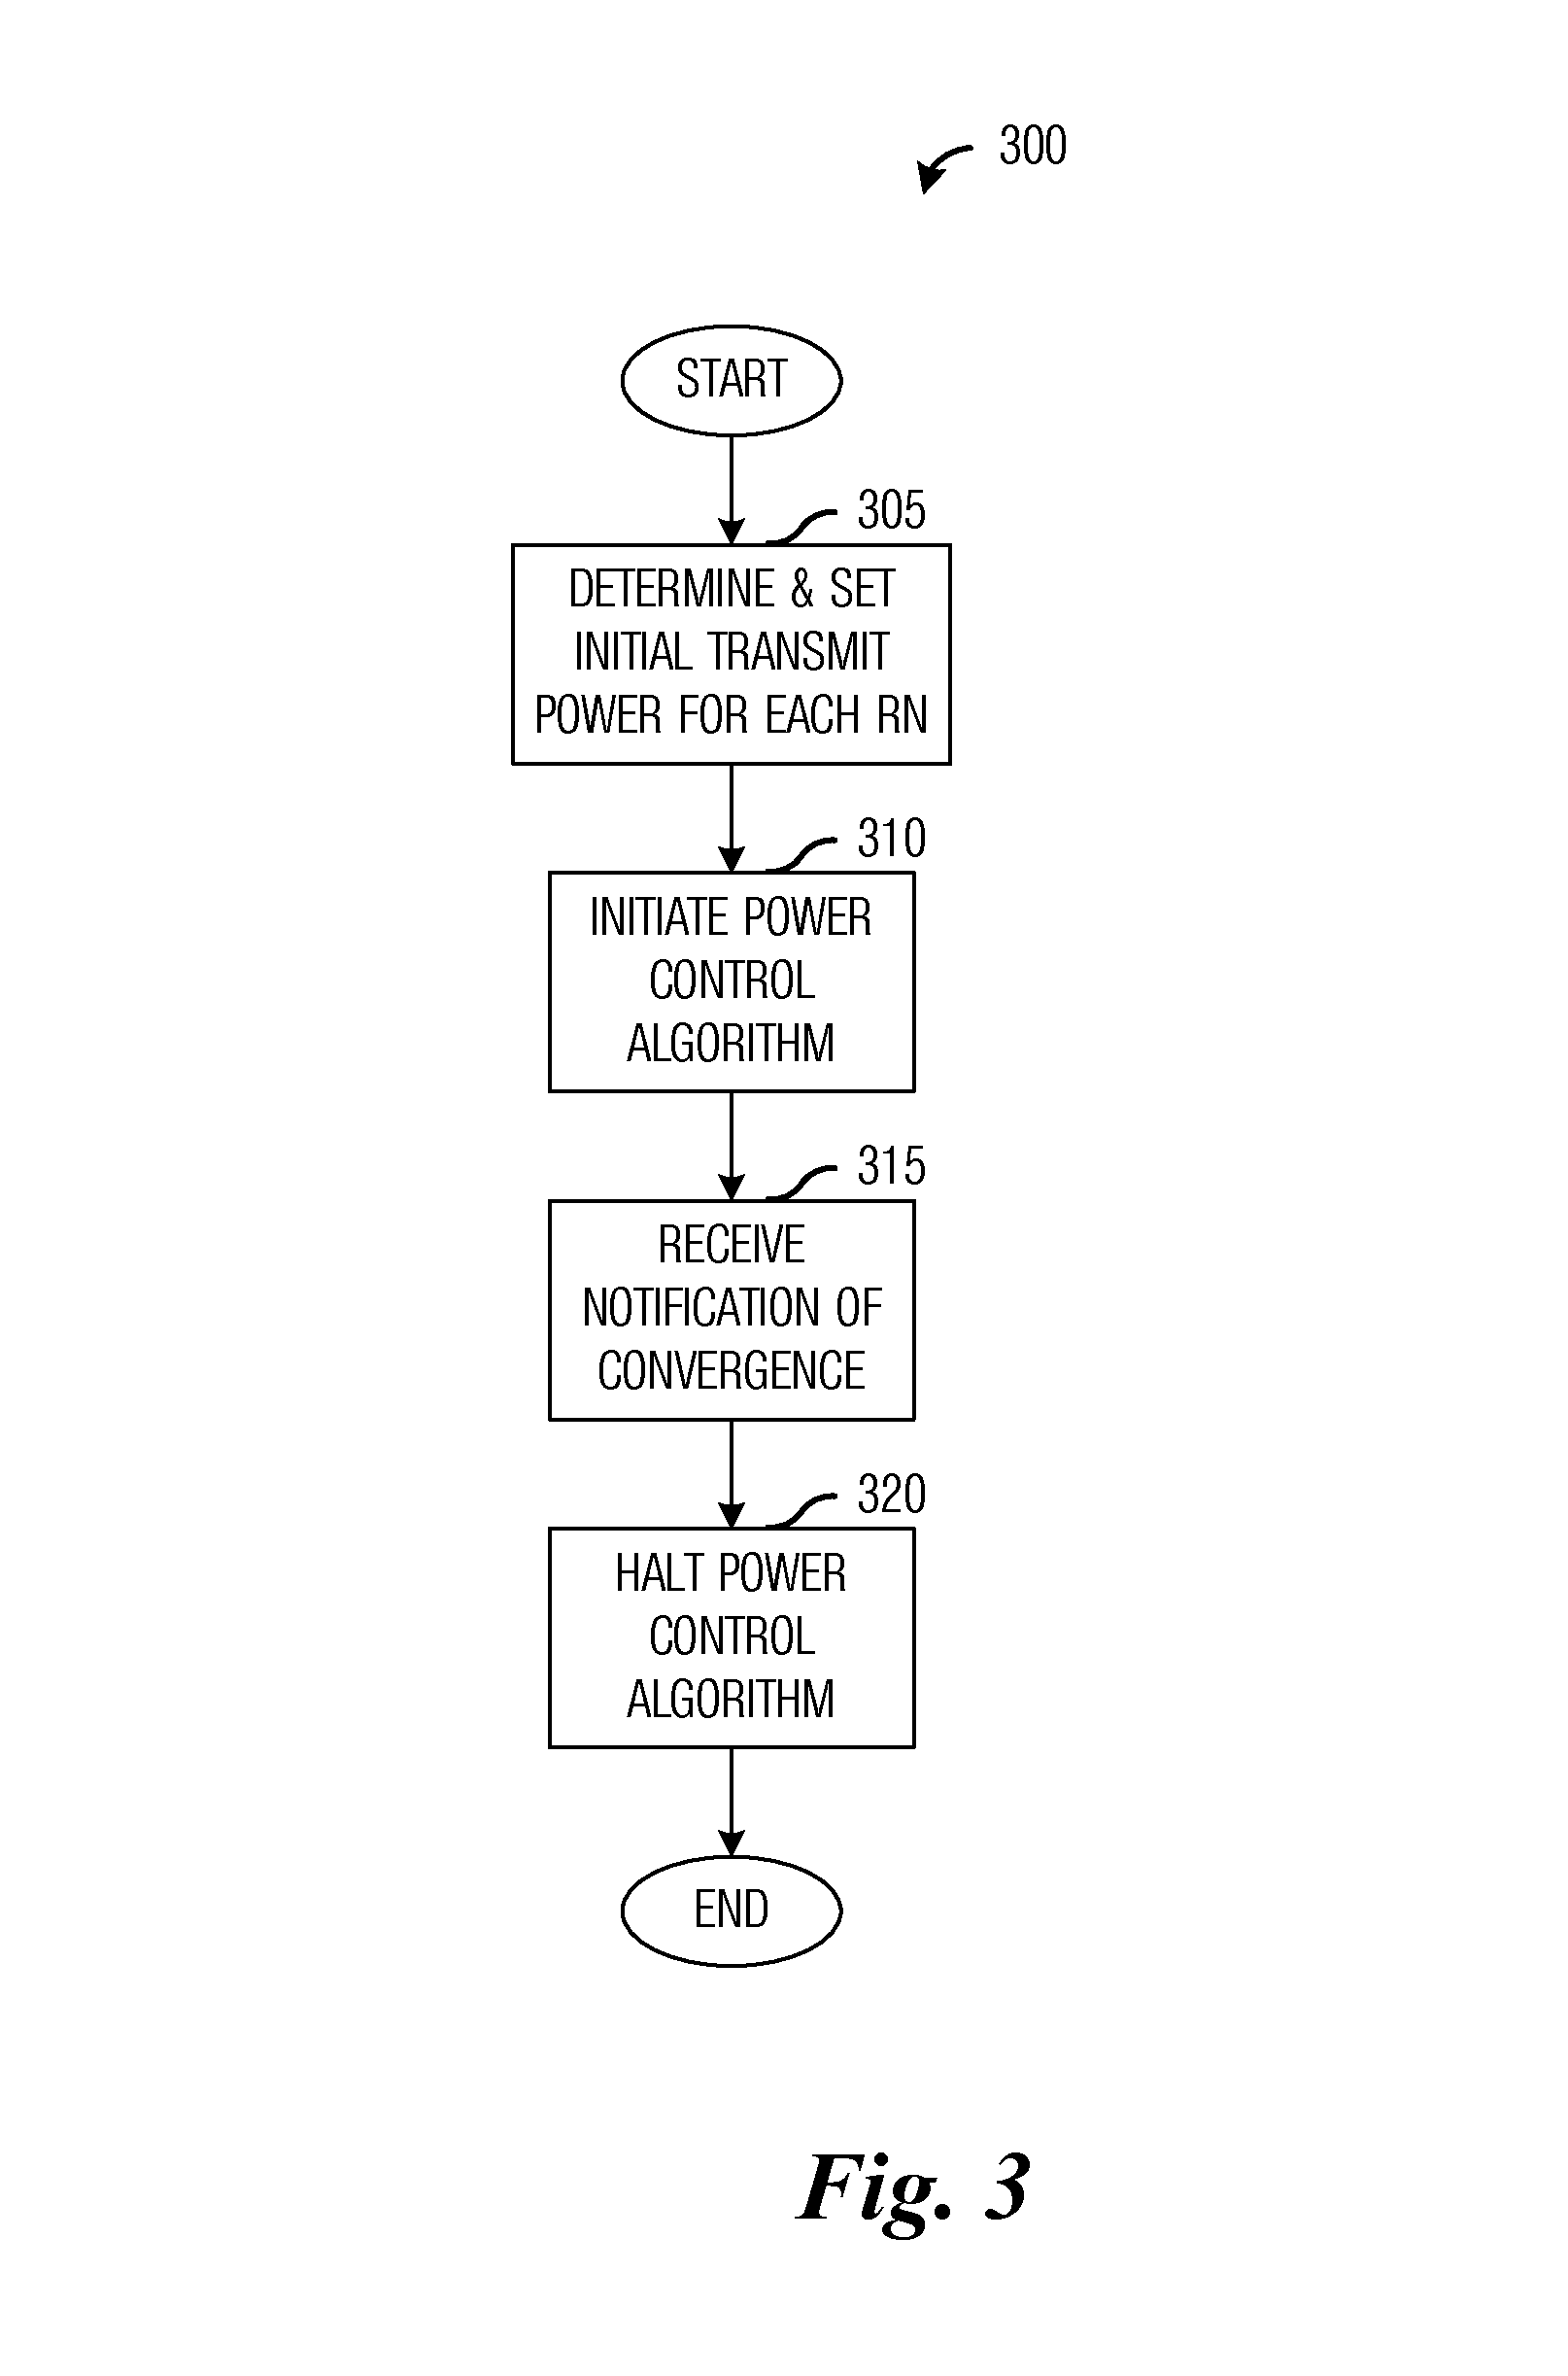 System and method for distributed power control in a communications system